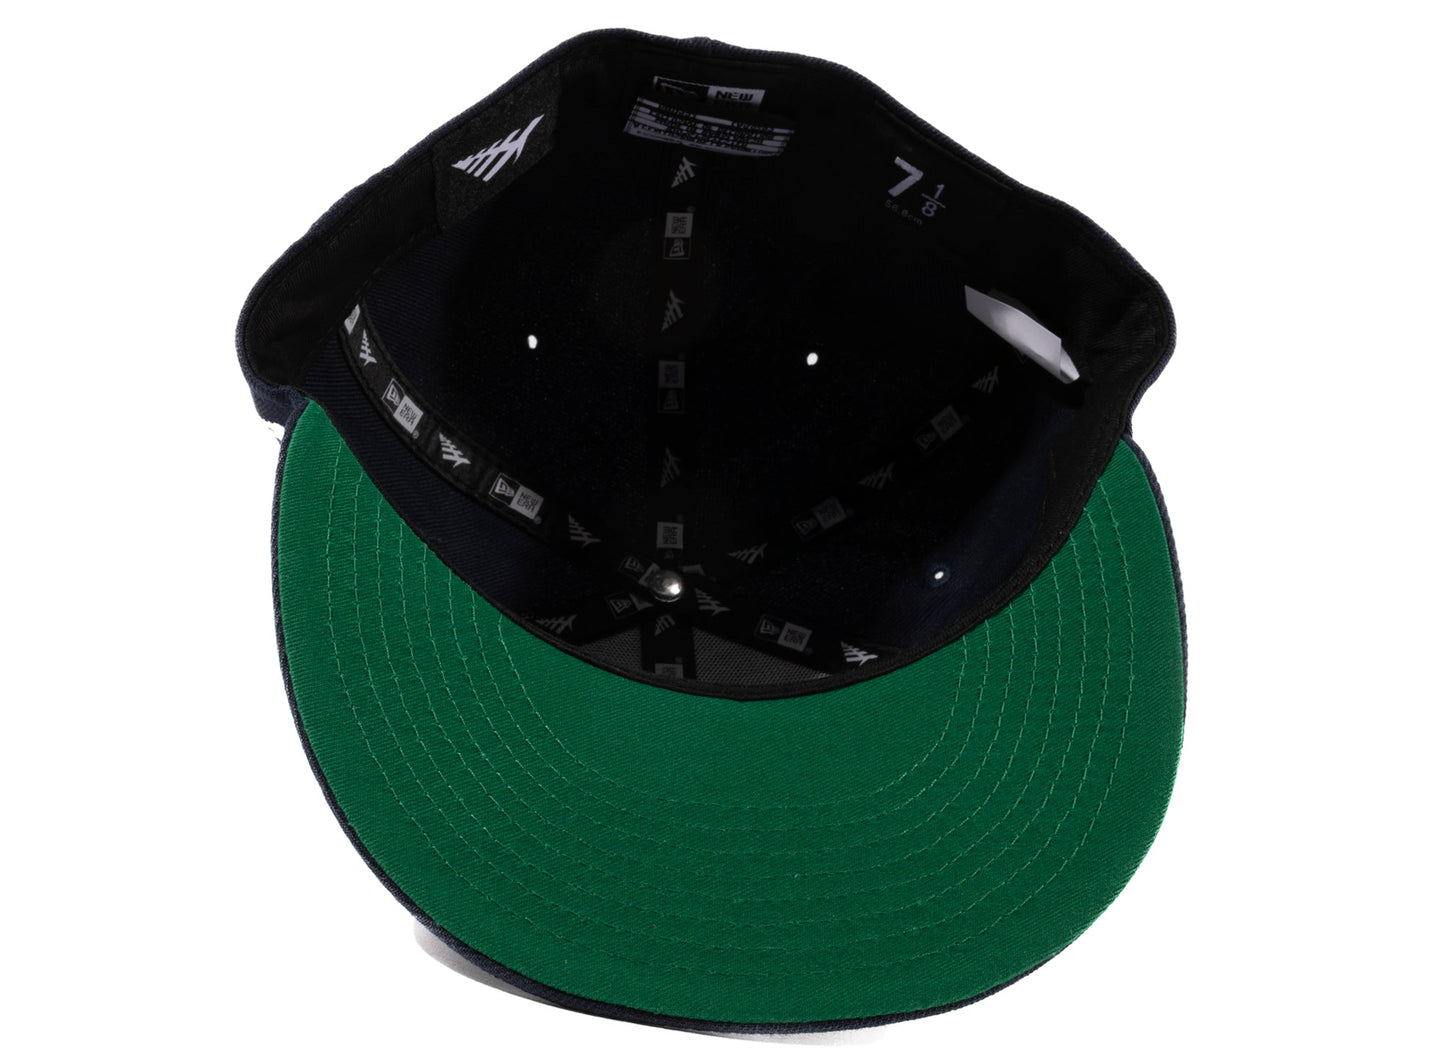 Paper Planes Sapphire Crown 59FIFTY Fitted Hat